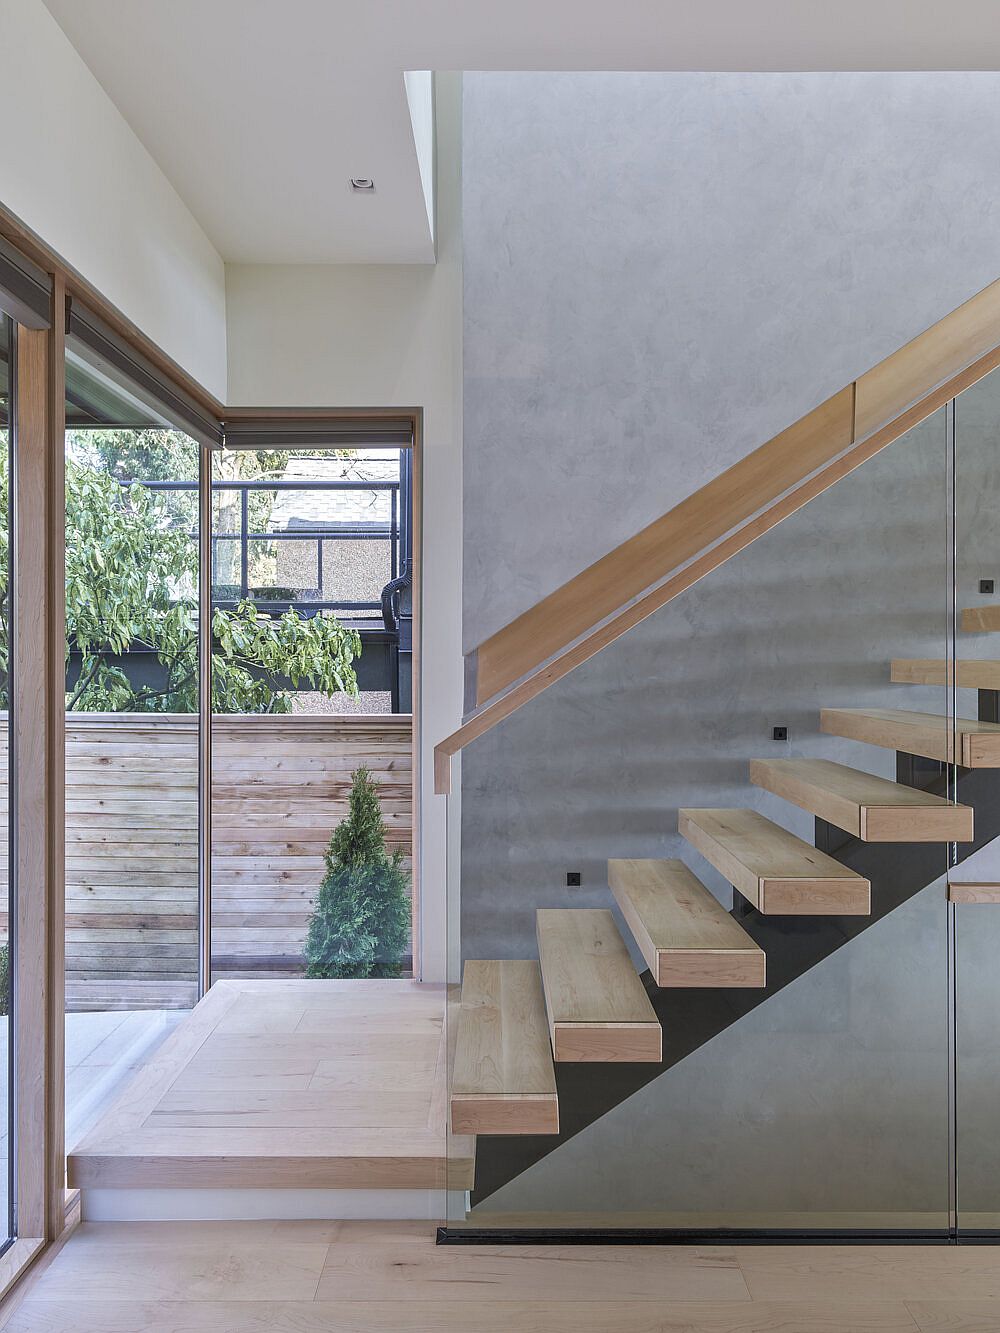 Sleek-and-stylish-glass-and-wood-staircase-inside-the-house-with-modern-design-20497